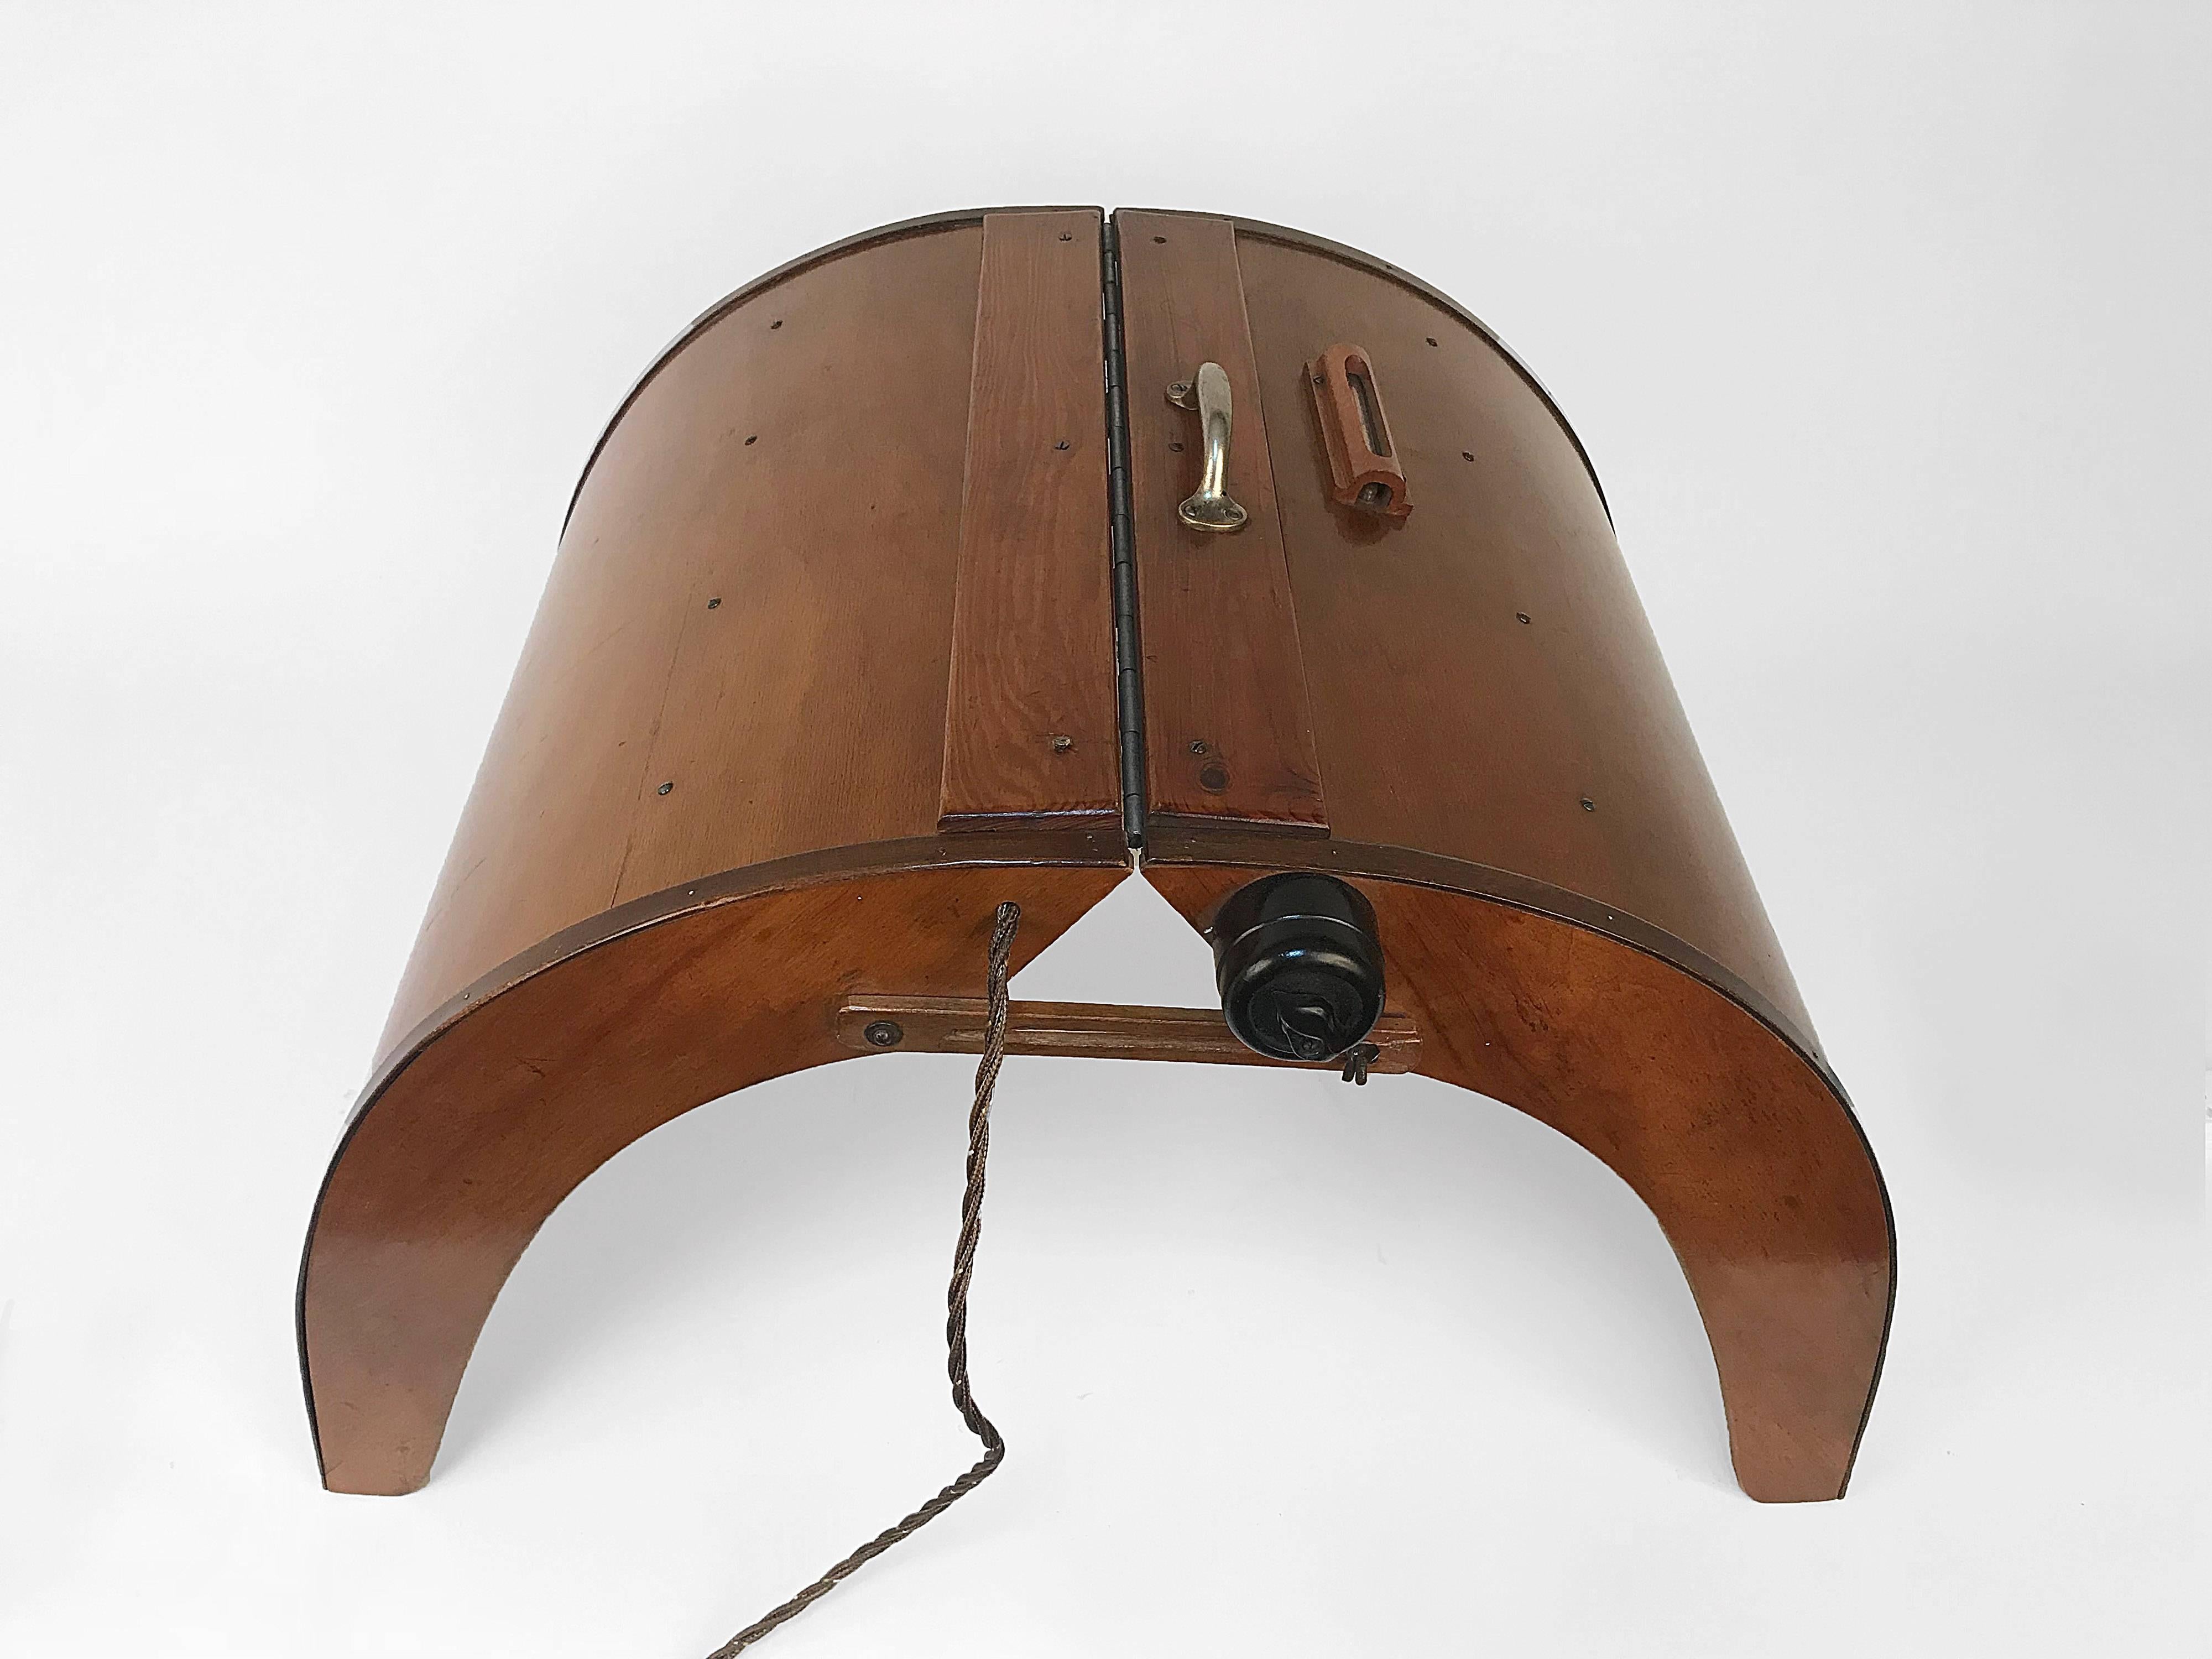 German Medical or Tanning Lamp, Wood and Bakelite, 1940s For Sale 5